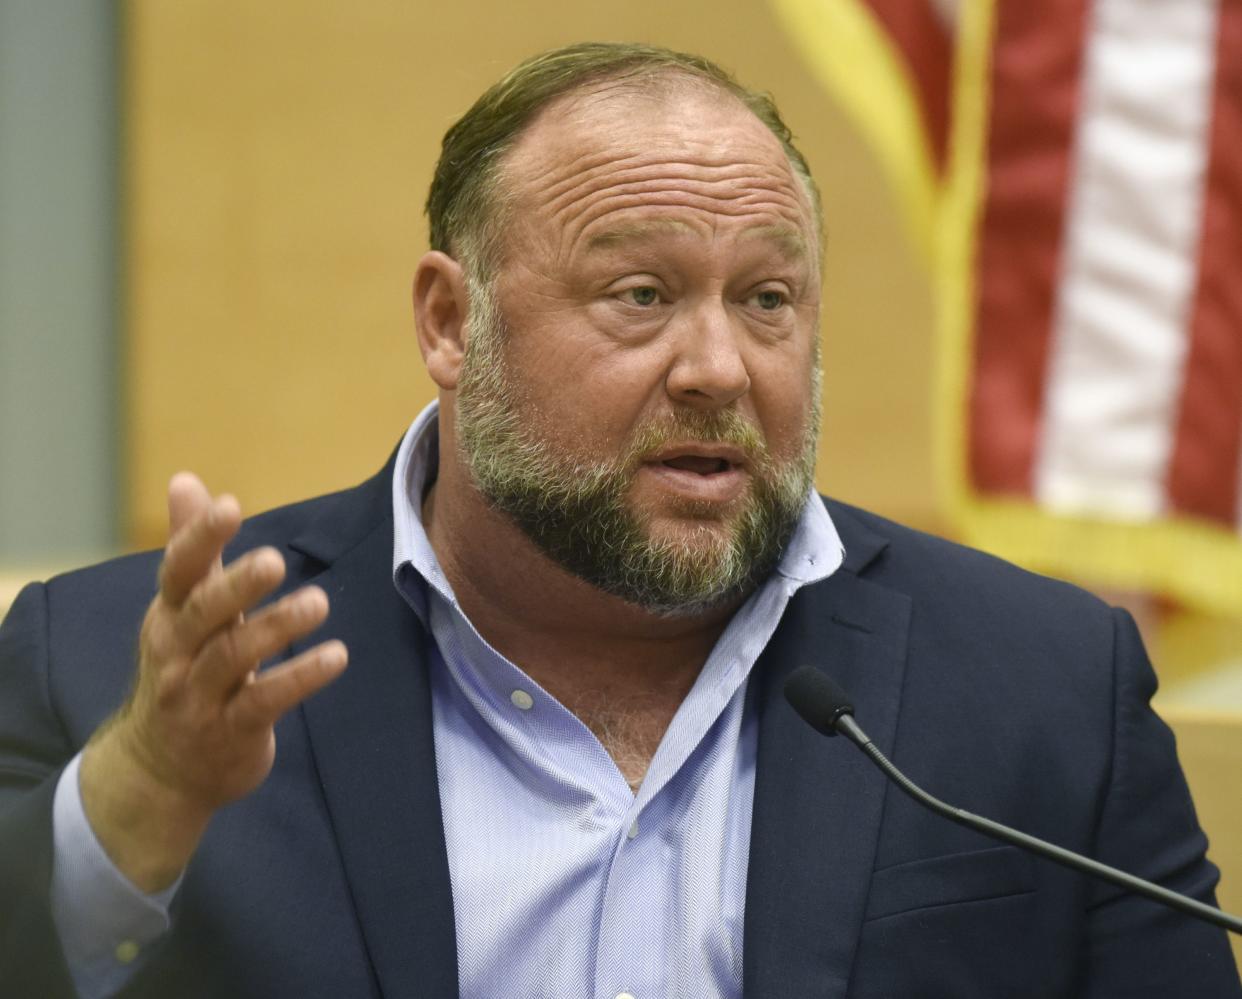 Conspiracy theorist Alex Jones takes the witness stand to testify at the Sandy Hook defamation damages trial at Connecticut Superior Court in Waterbury, Conn., Sept. 22, 2022.